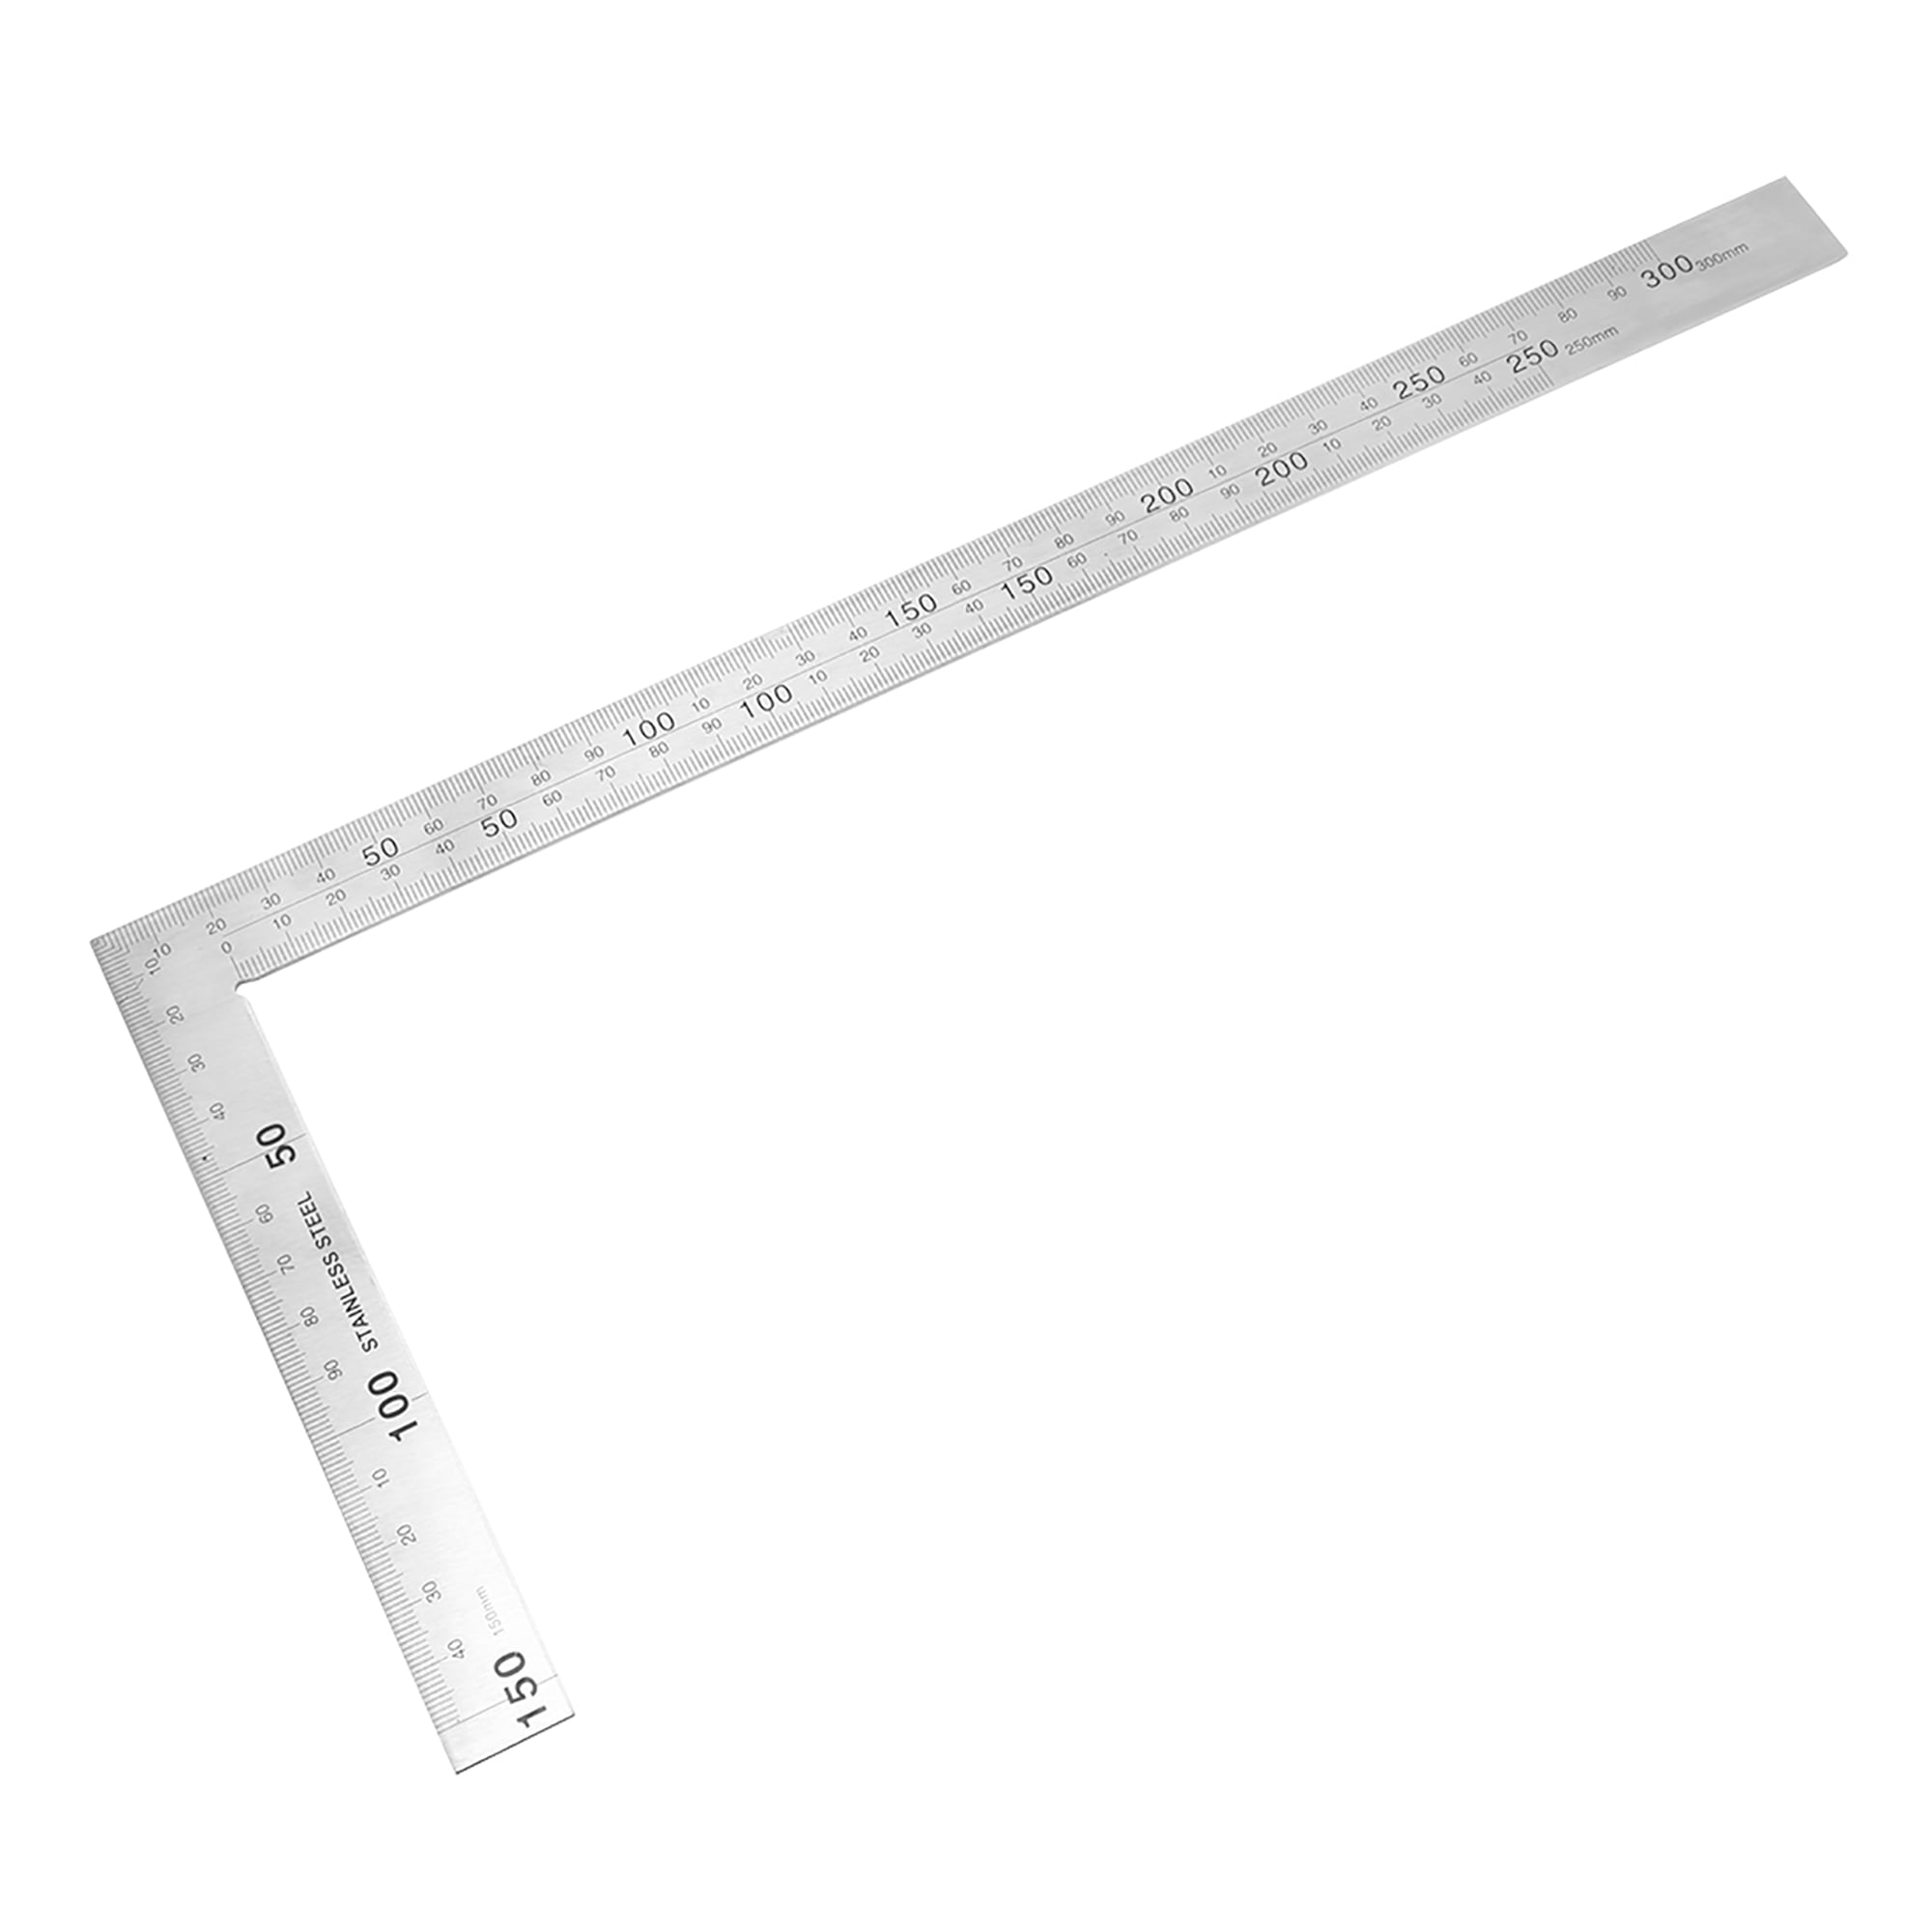 Stainless Steel L Square Angle Ruler Tools 300/500mm Layout Mark Durable